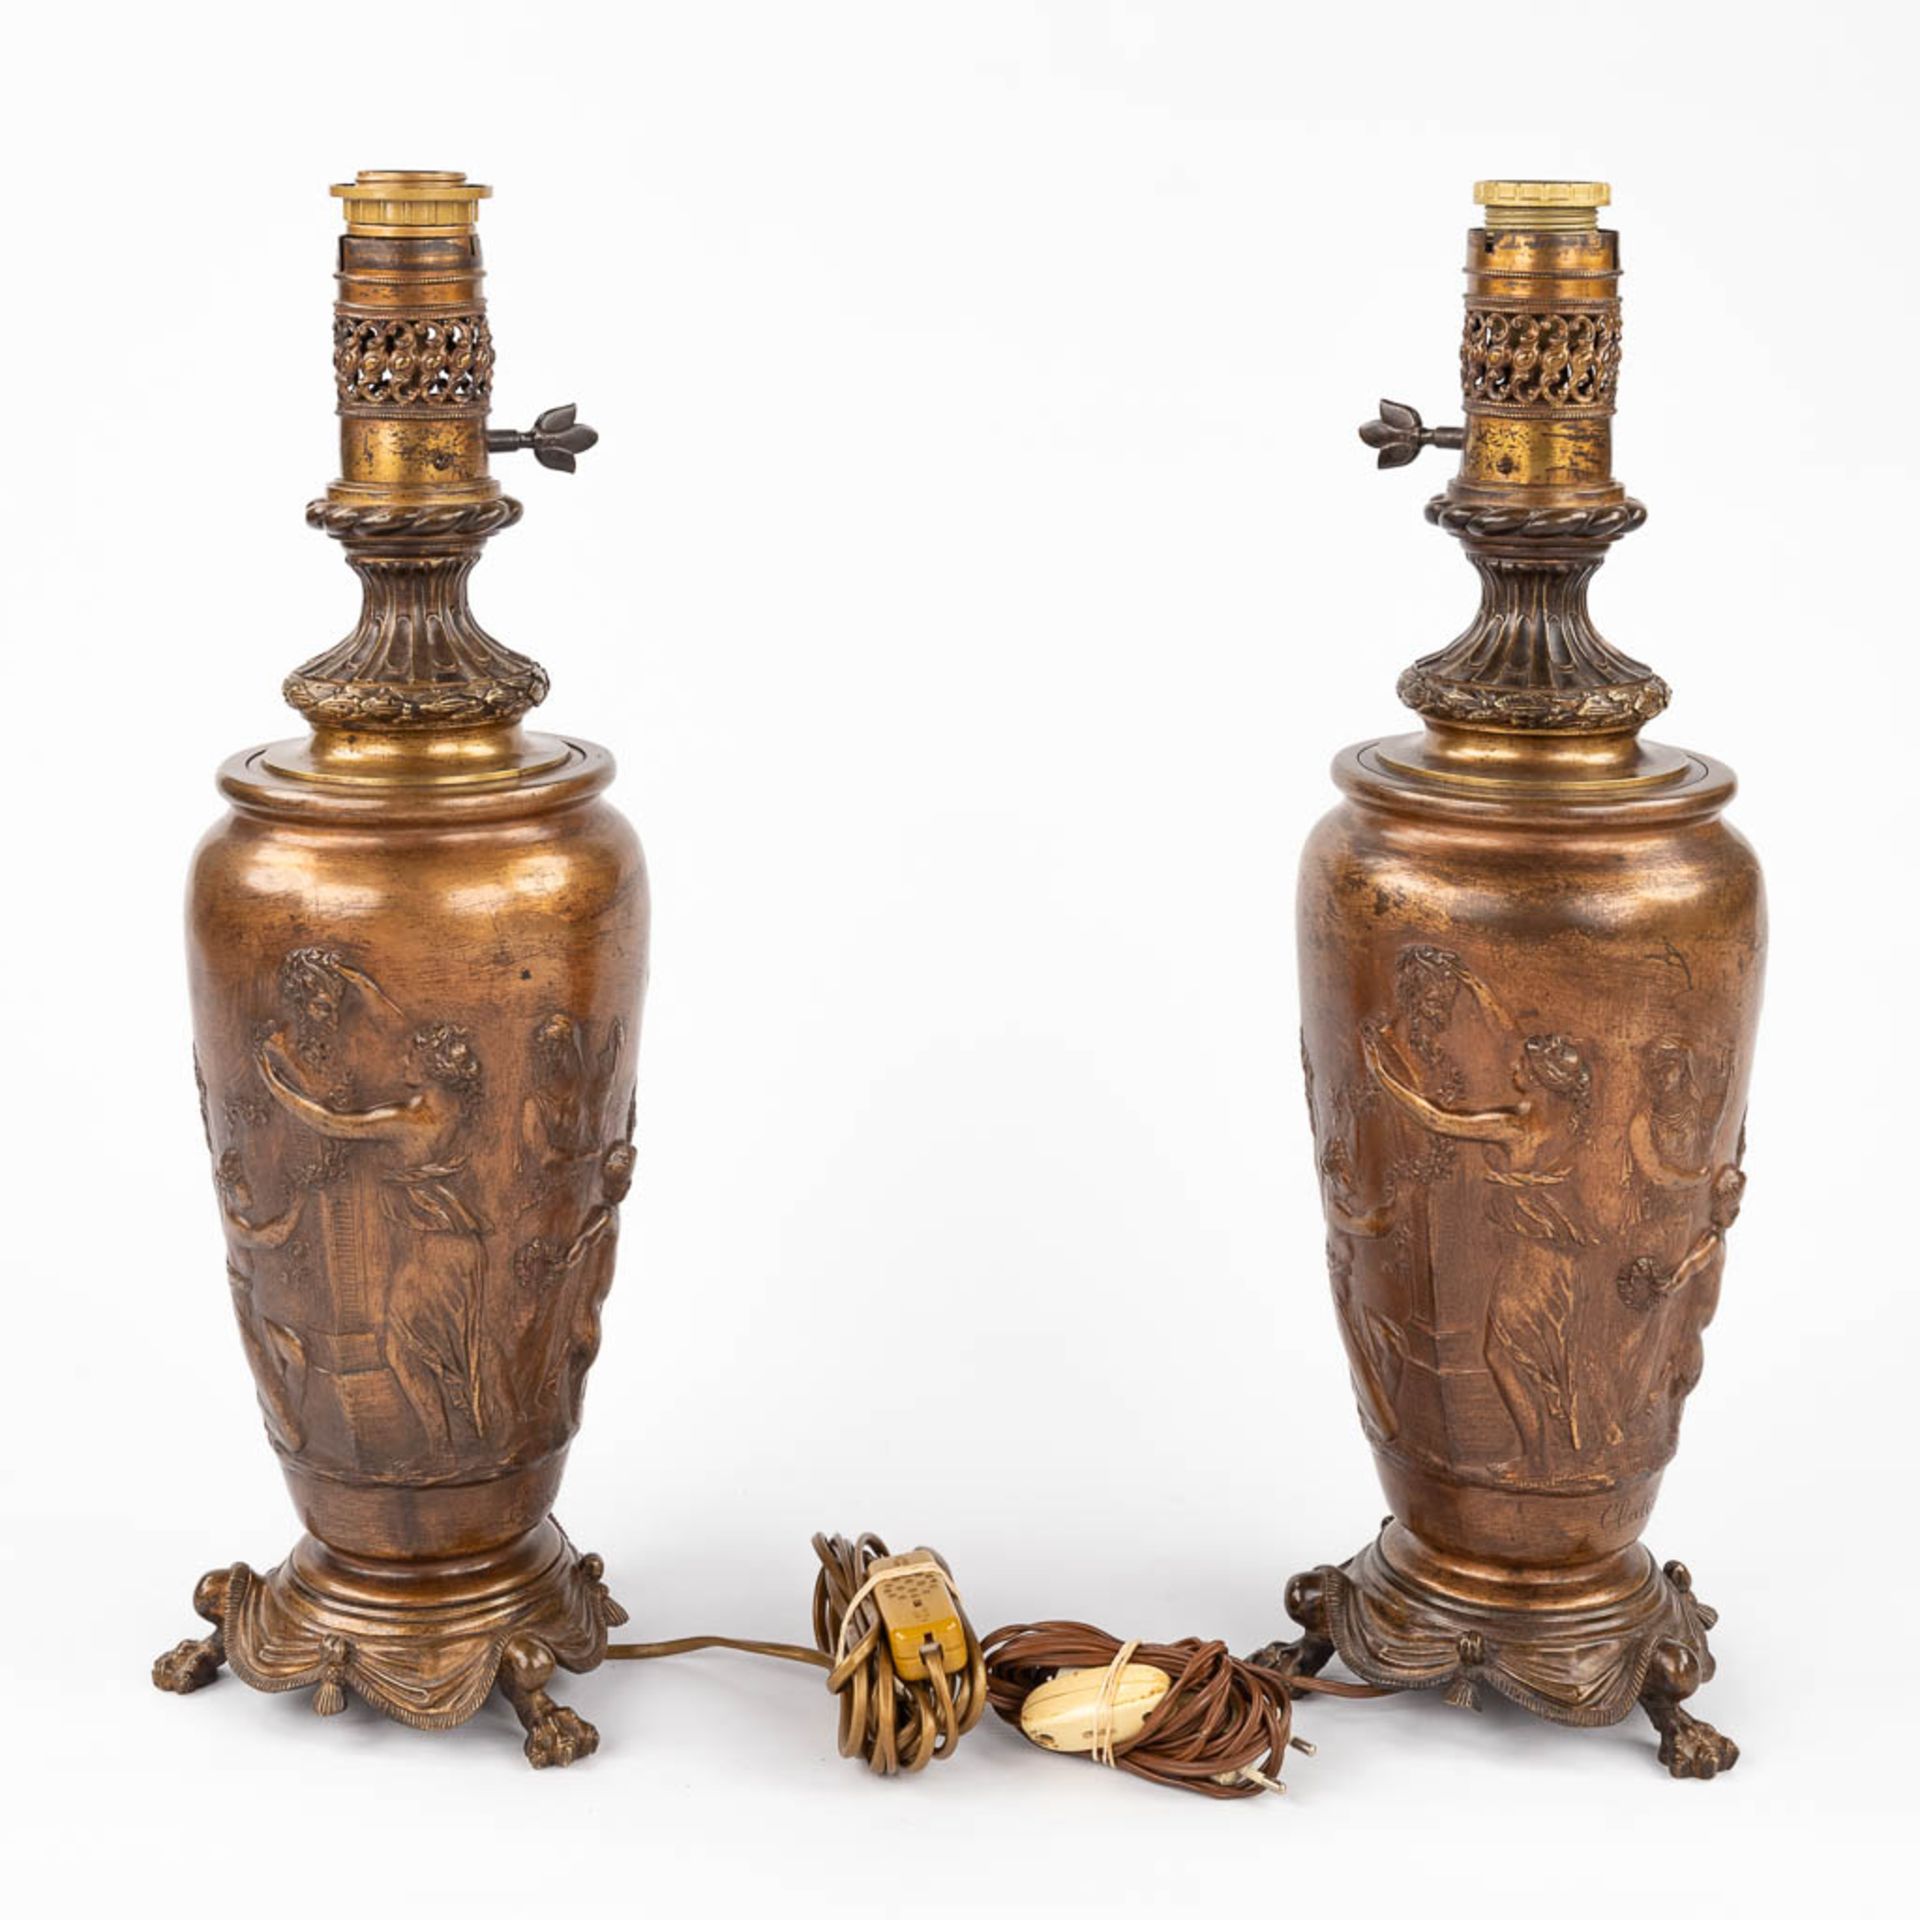 CLODION (1738-1814) 'Pair of oil lamps' bronze decorated with Satyrs and Nymphs. 19th C. (H:55 x D:1 - Bild 6 aus 14